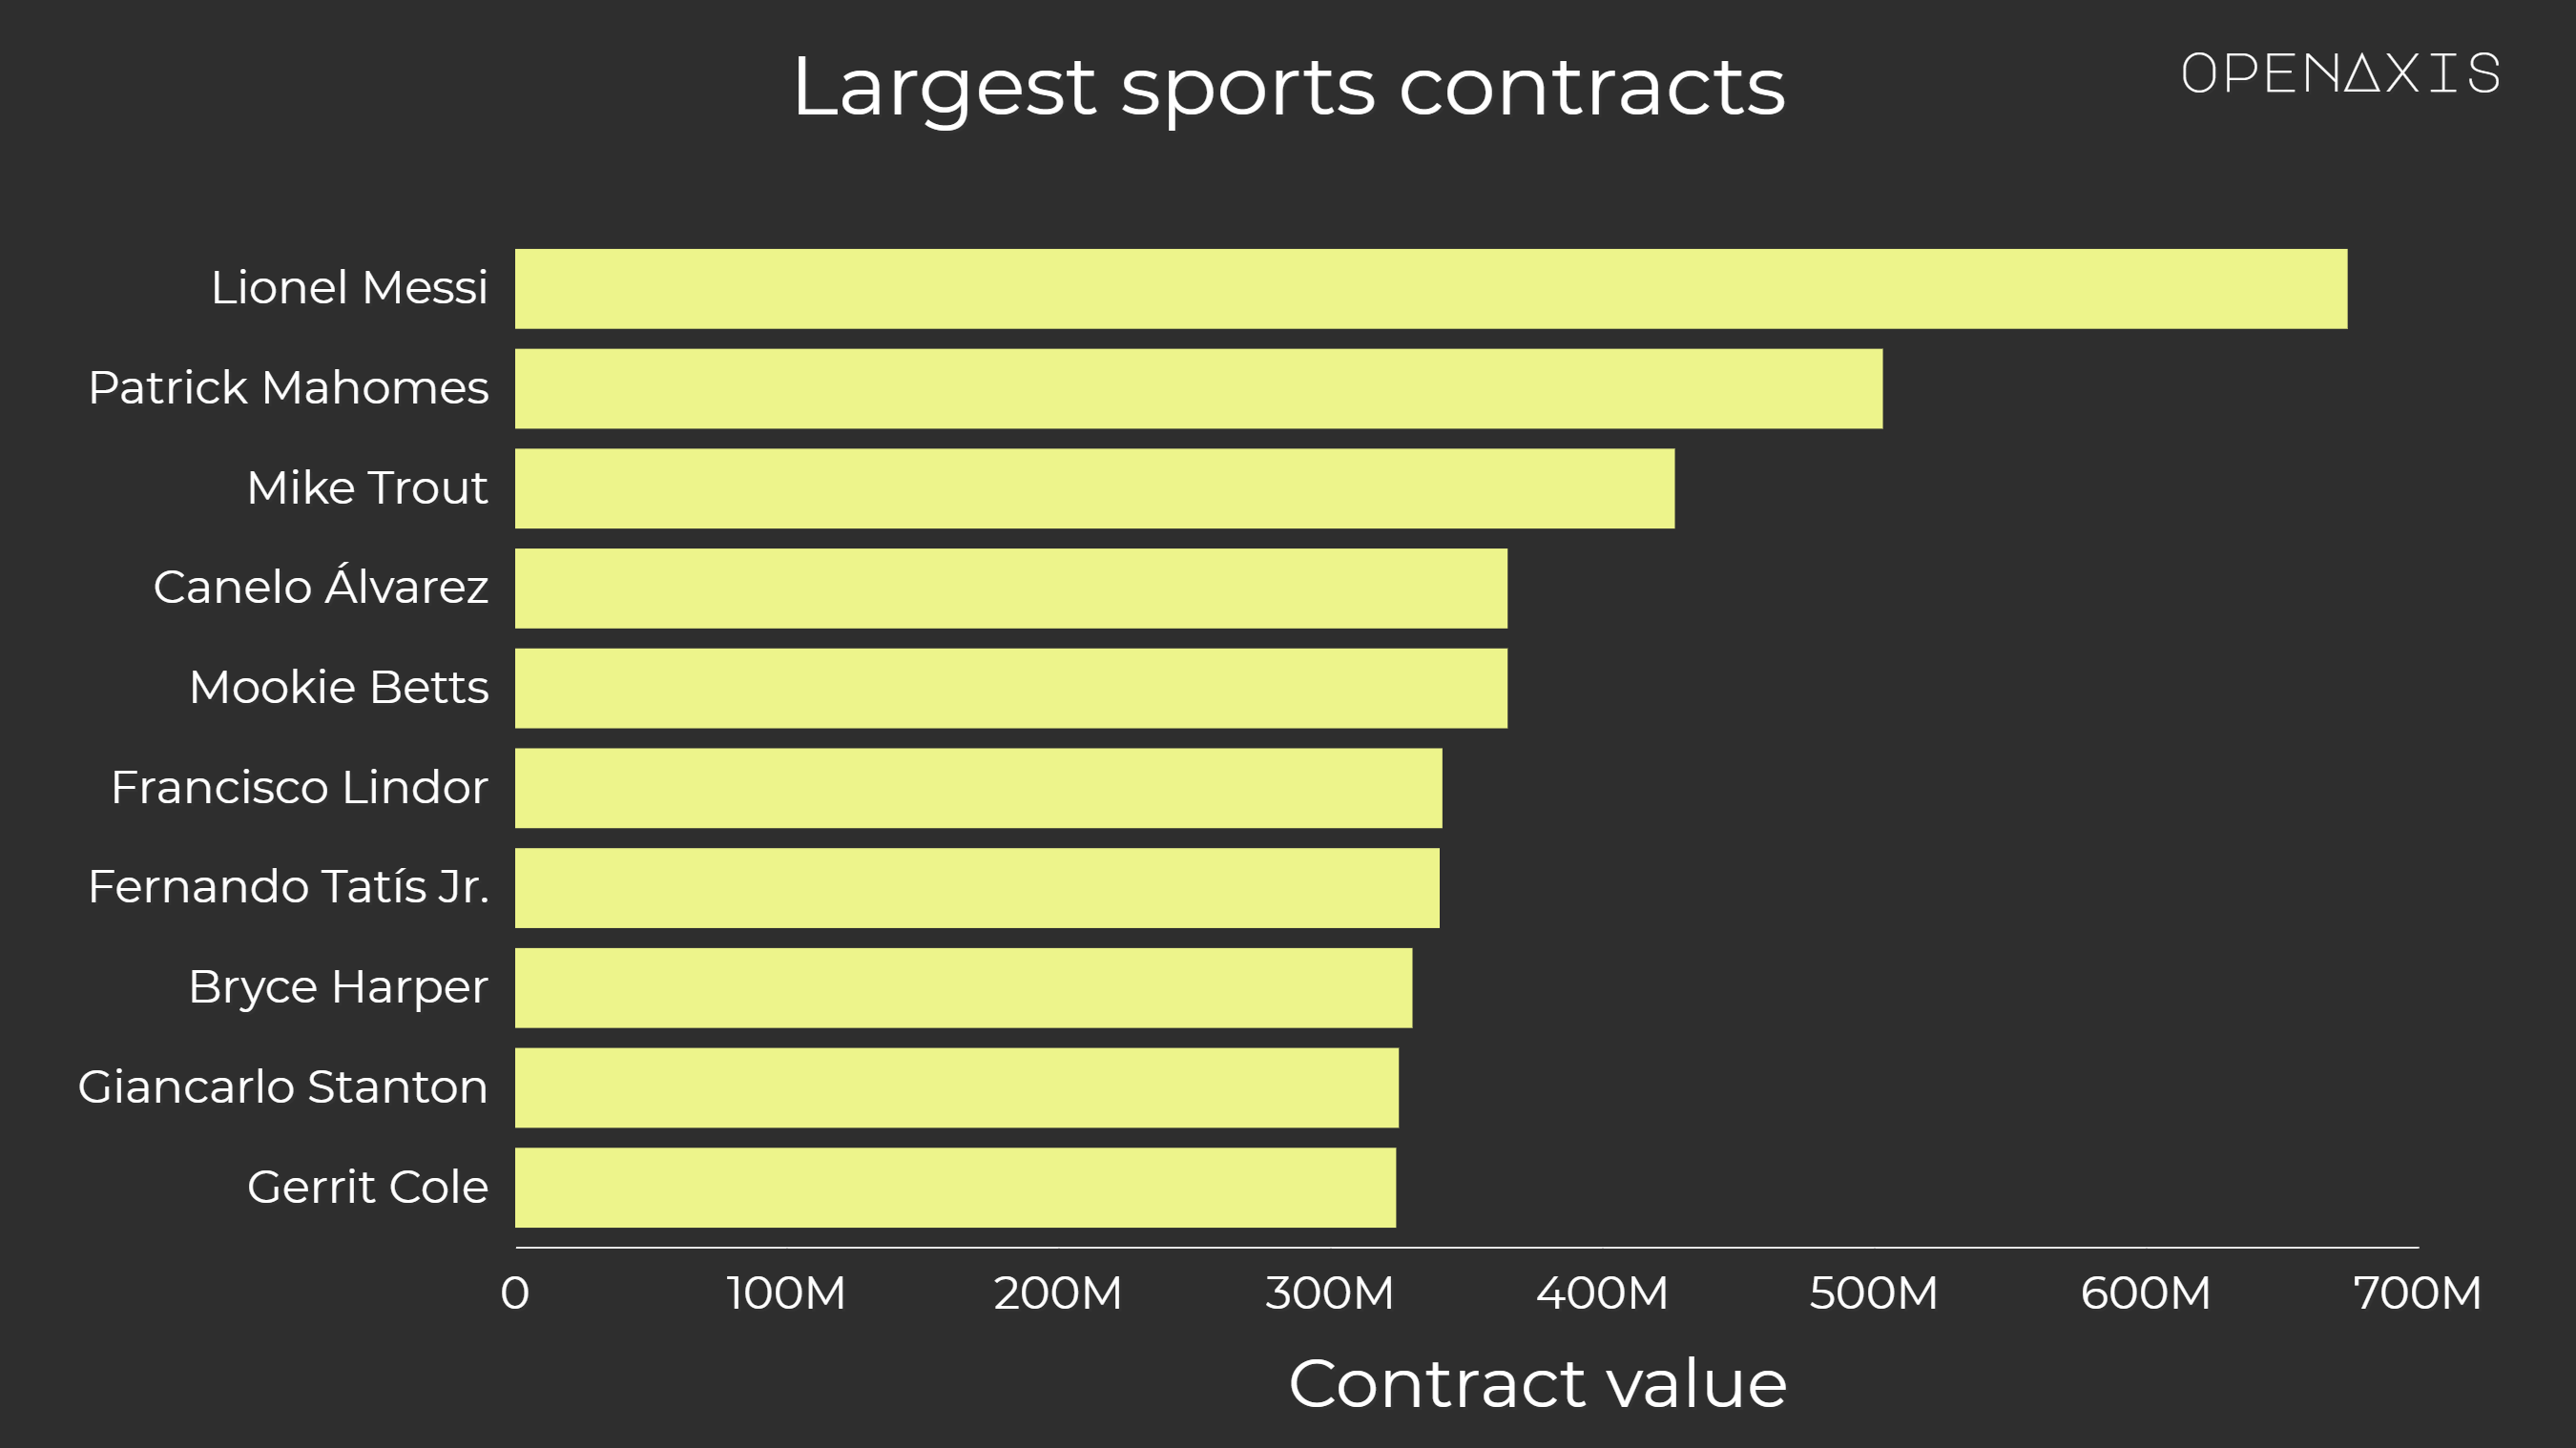 "Largest sports contracts"